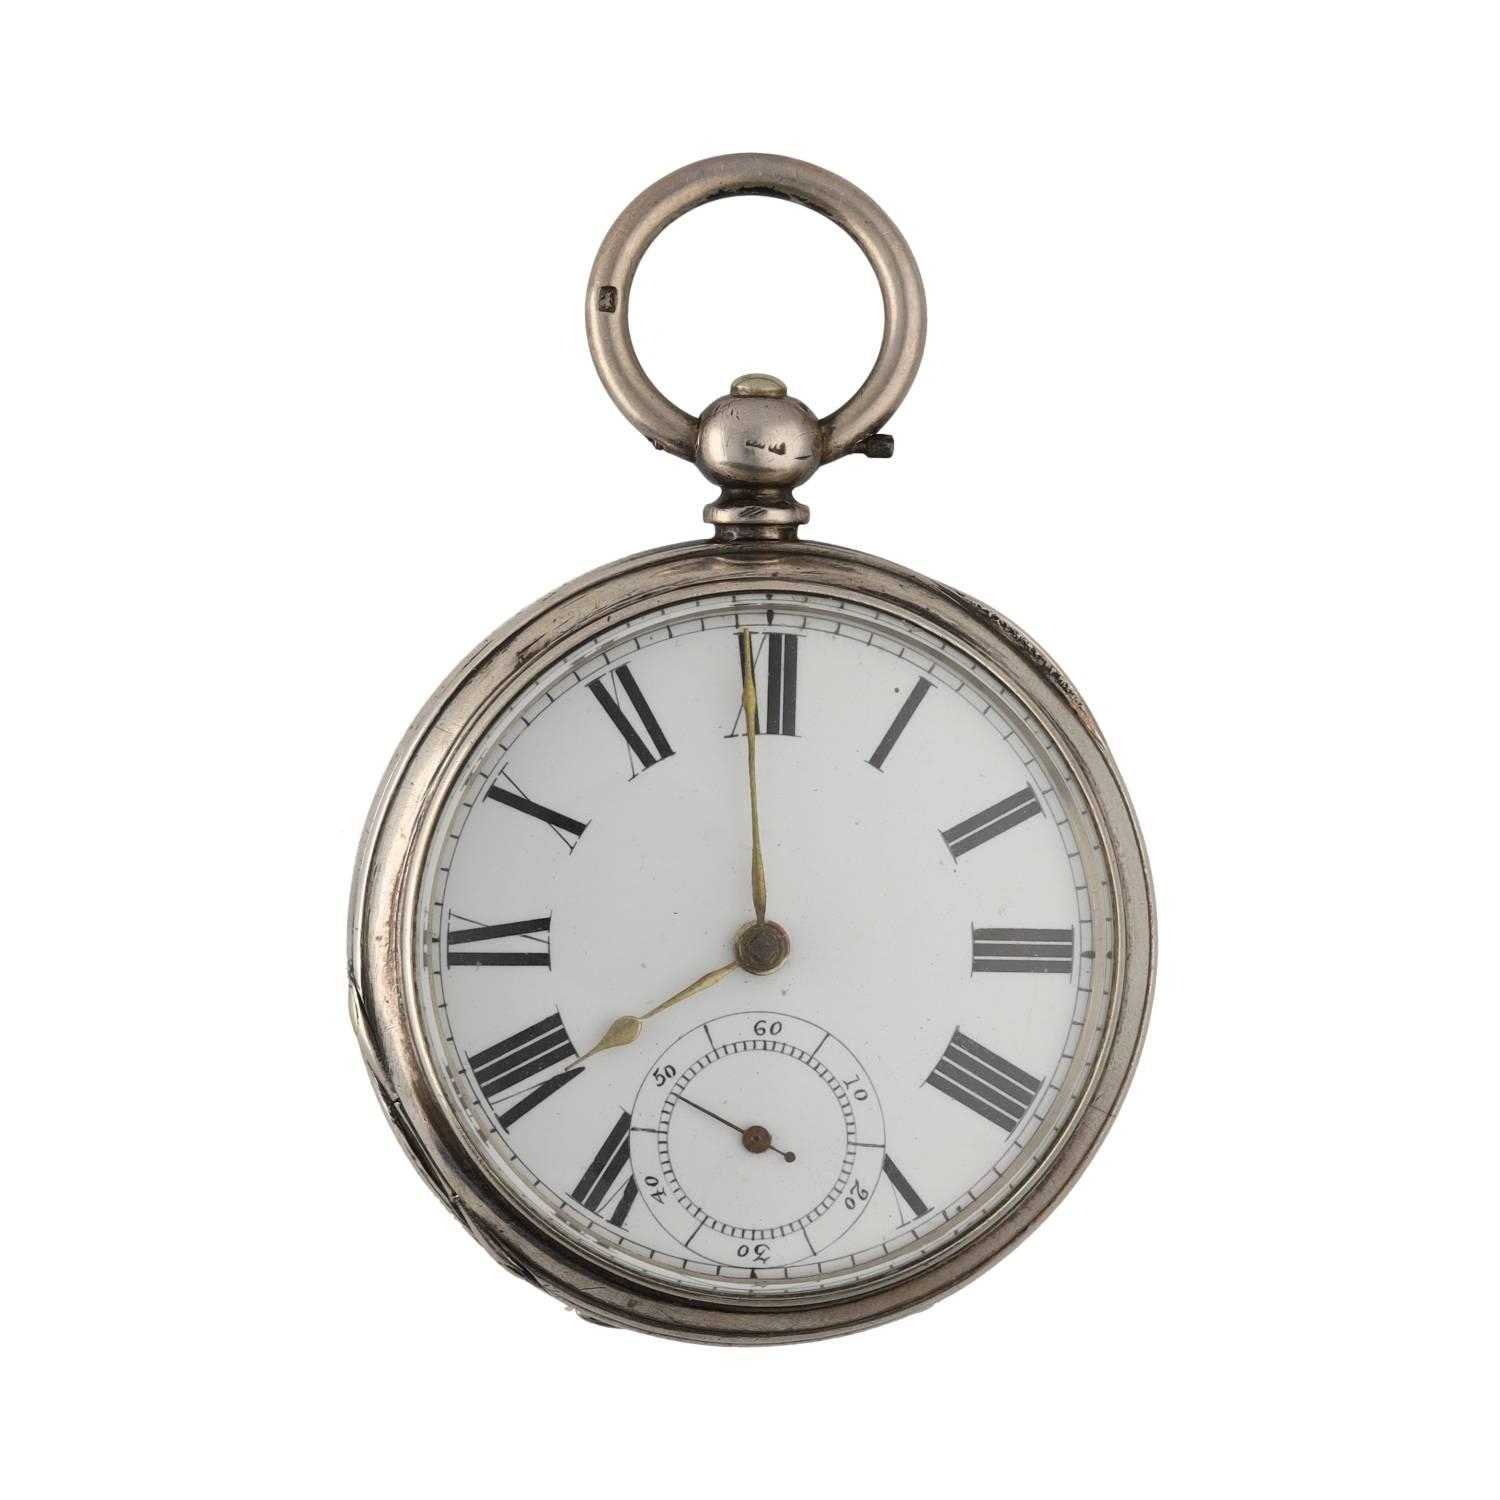 American Waltham silver lever pocket watch, circa 1895, serial no. 7177558, signed movement with